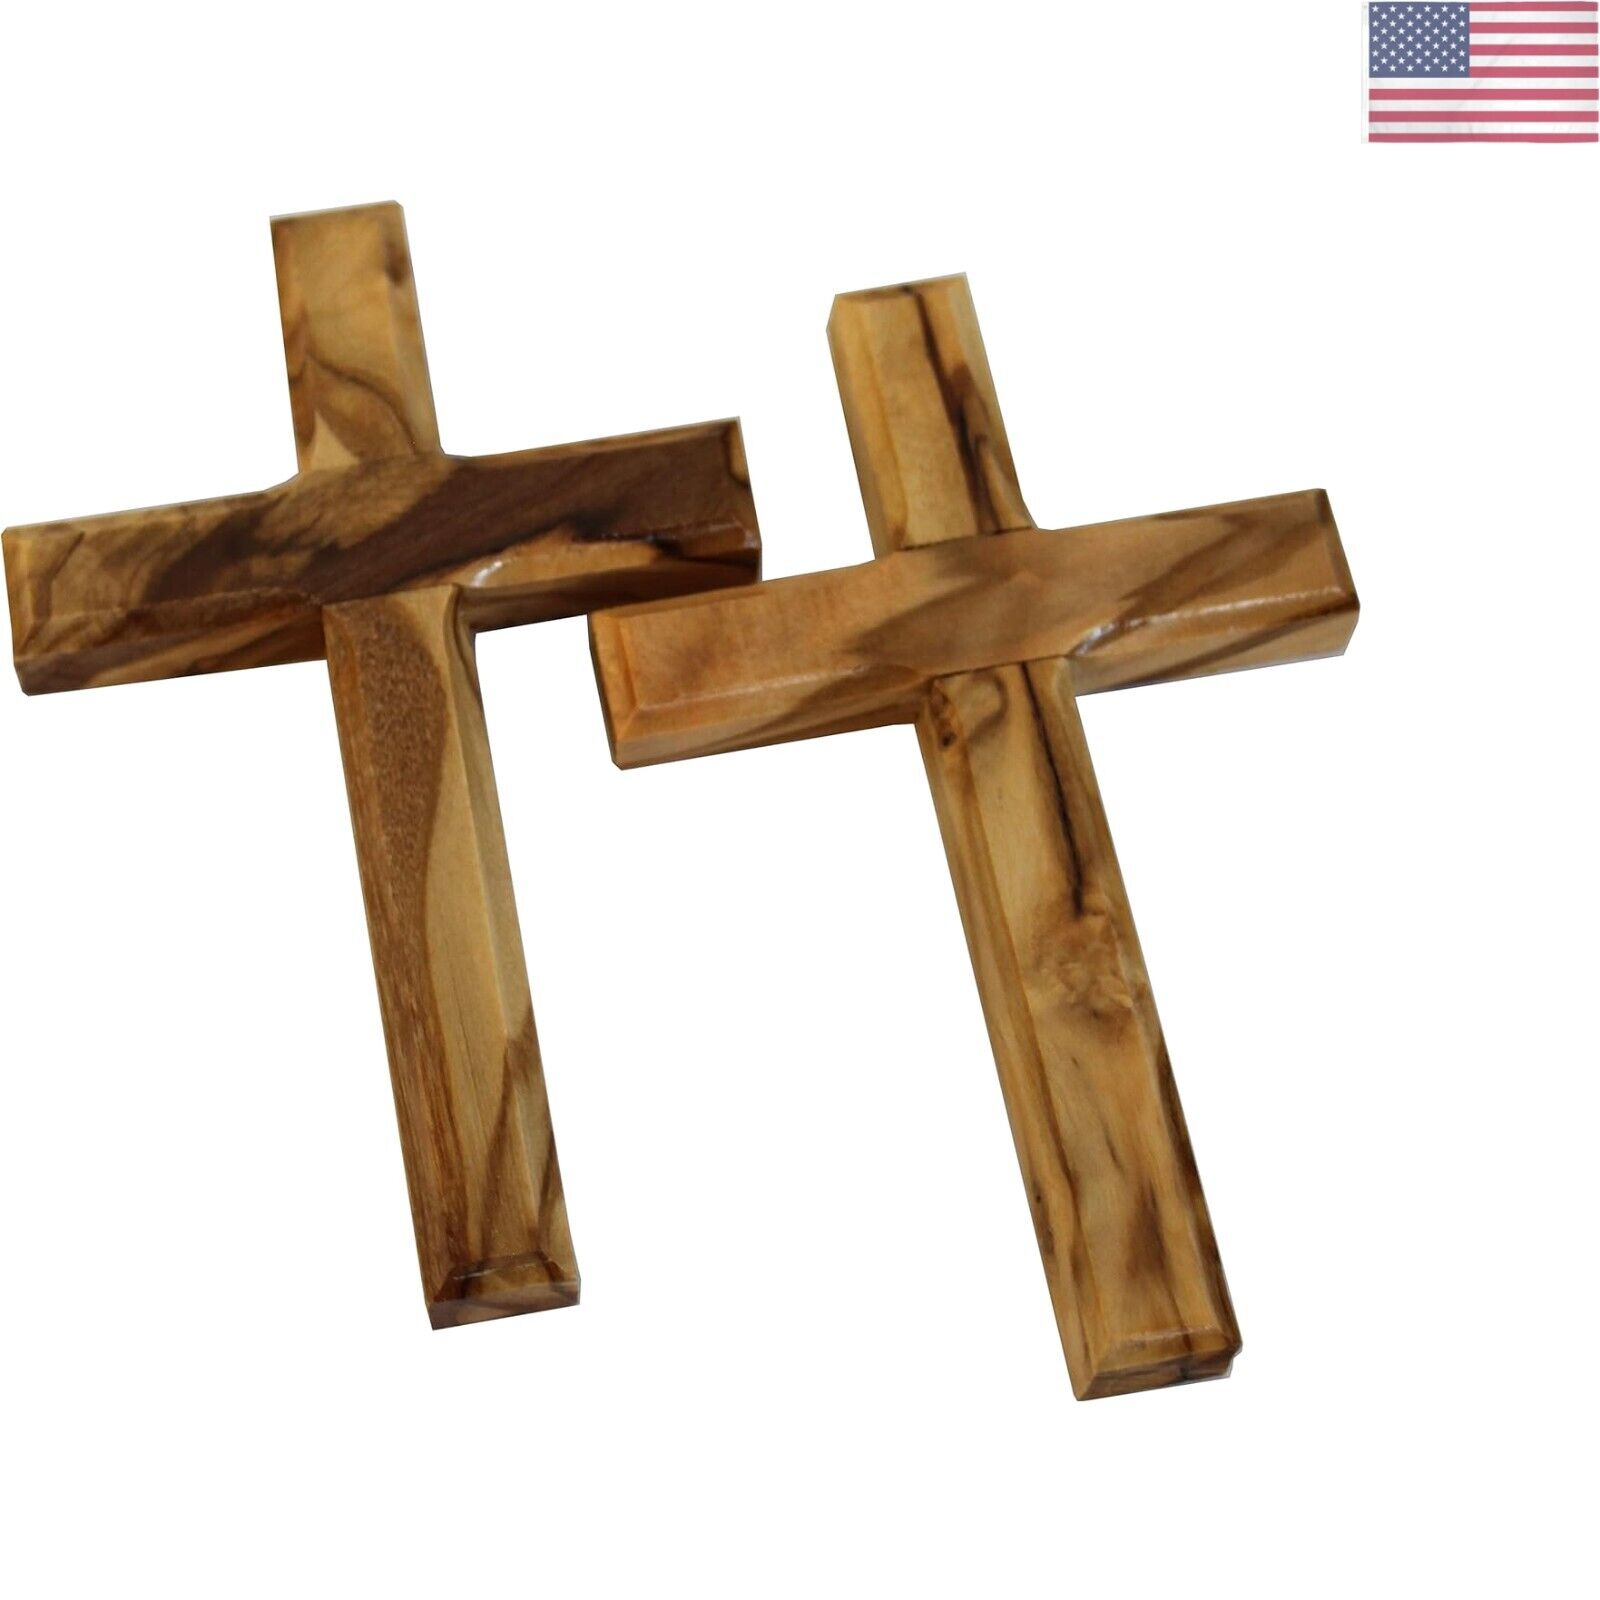 Pair 2 of 4 Inch Olive Wood Wall Hanging Crosses from Bethlehem 3.75 Inches -...